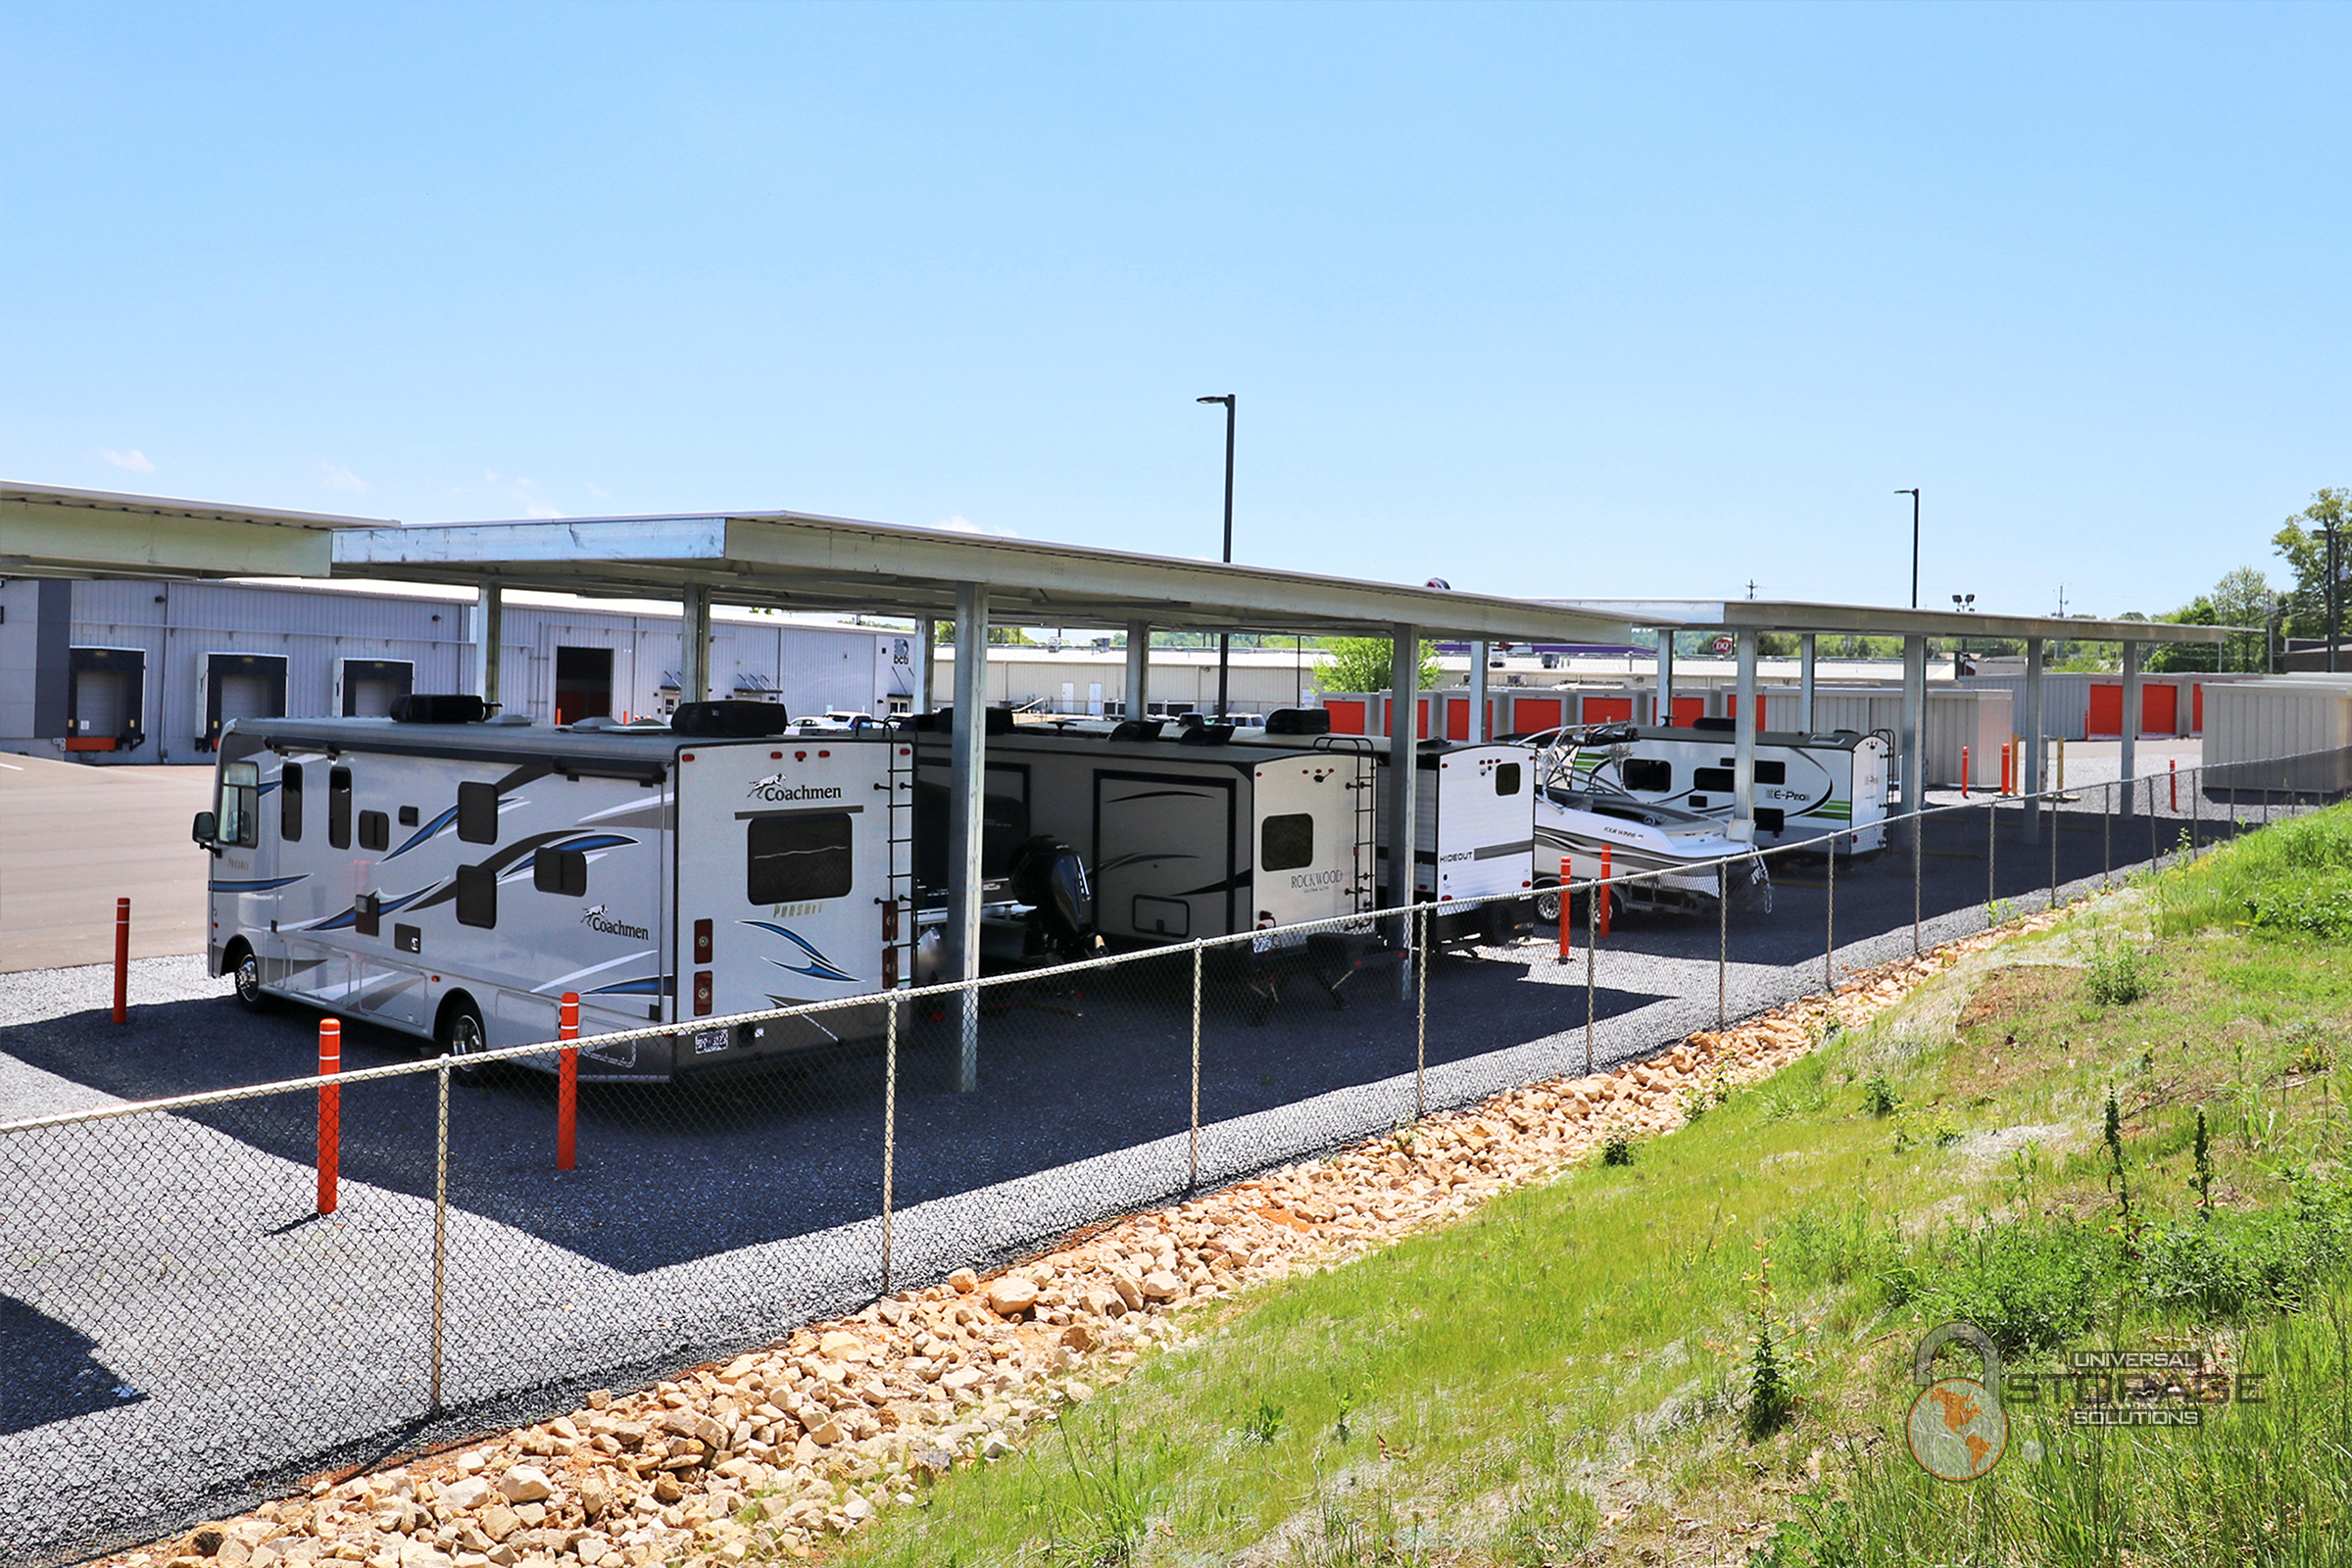 Universal Self Storage Gray Outdoor Covered Parking with RV's and boats.